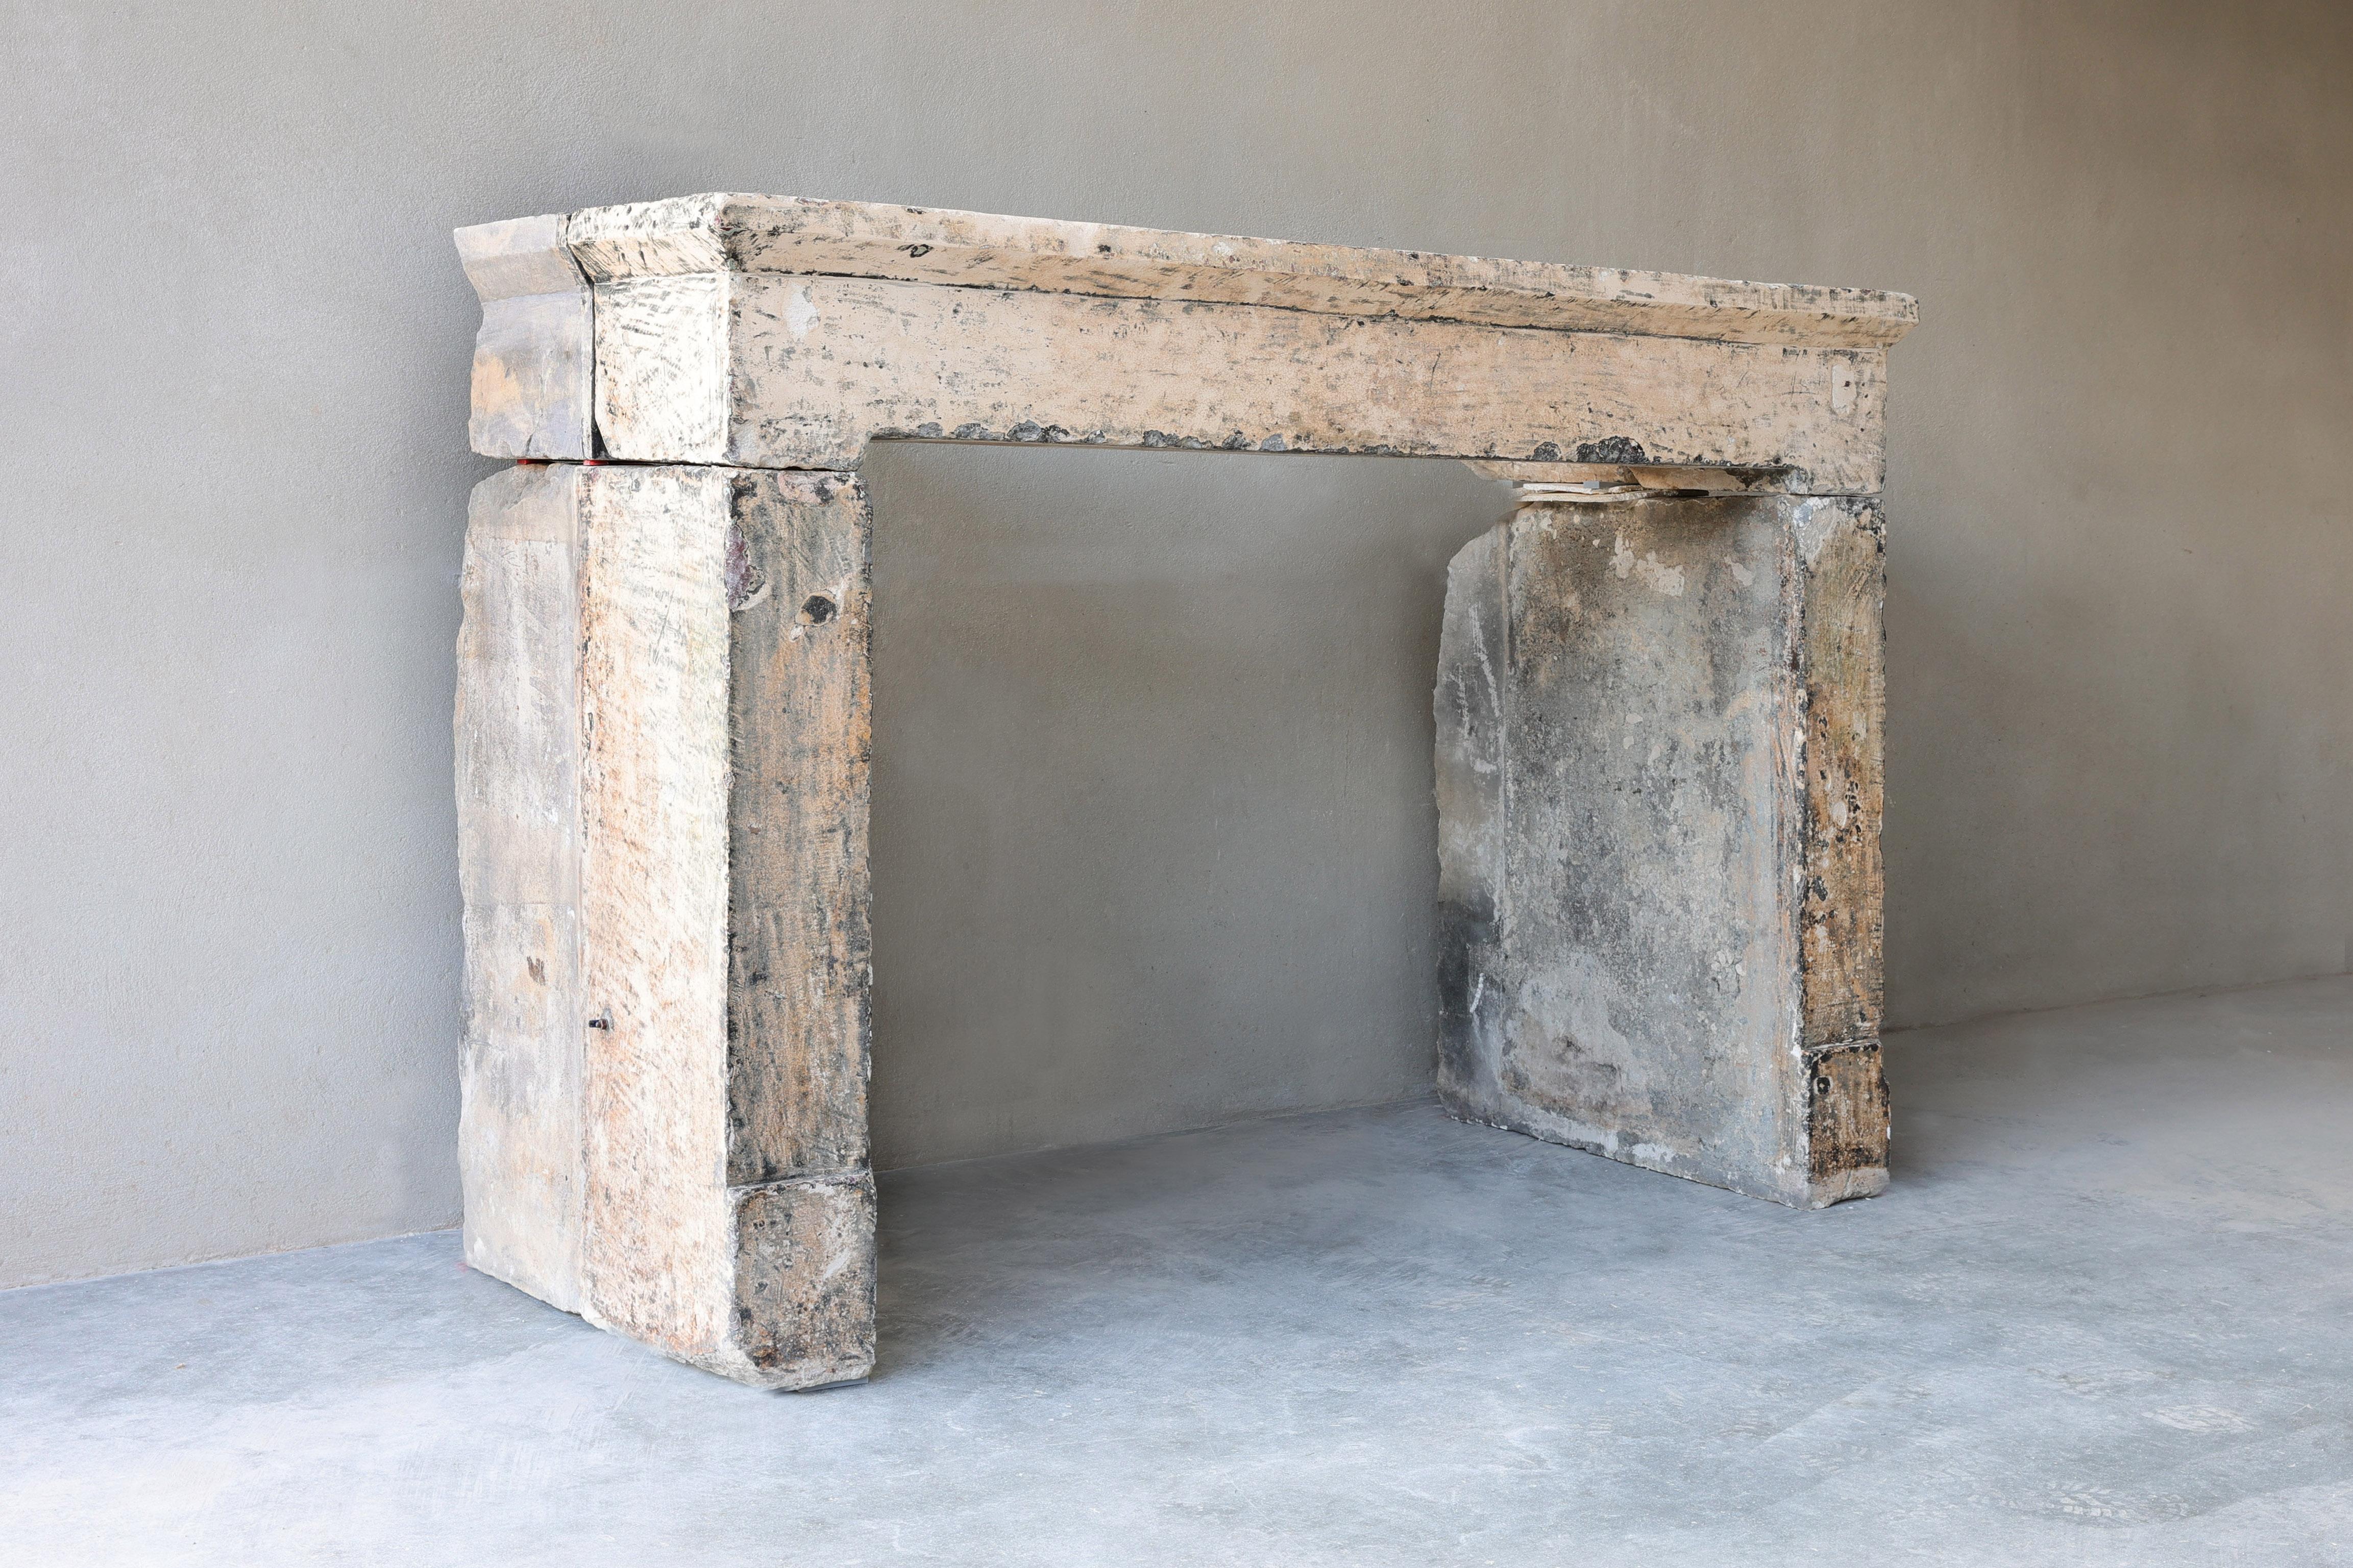 Beautiful rustic fireplace made of French limestone from the 18th century! A fireplace with character and authenticity from the Burgundy region in France.